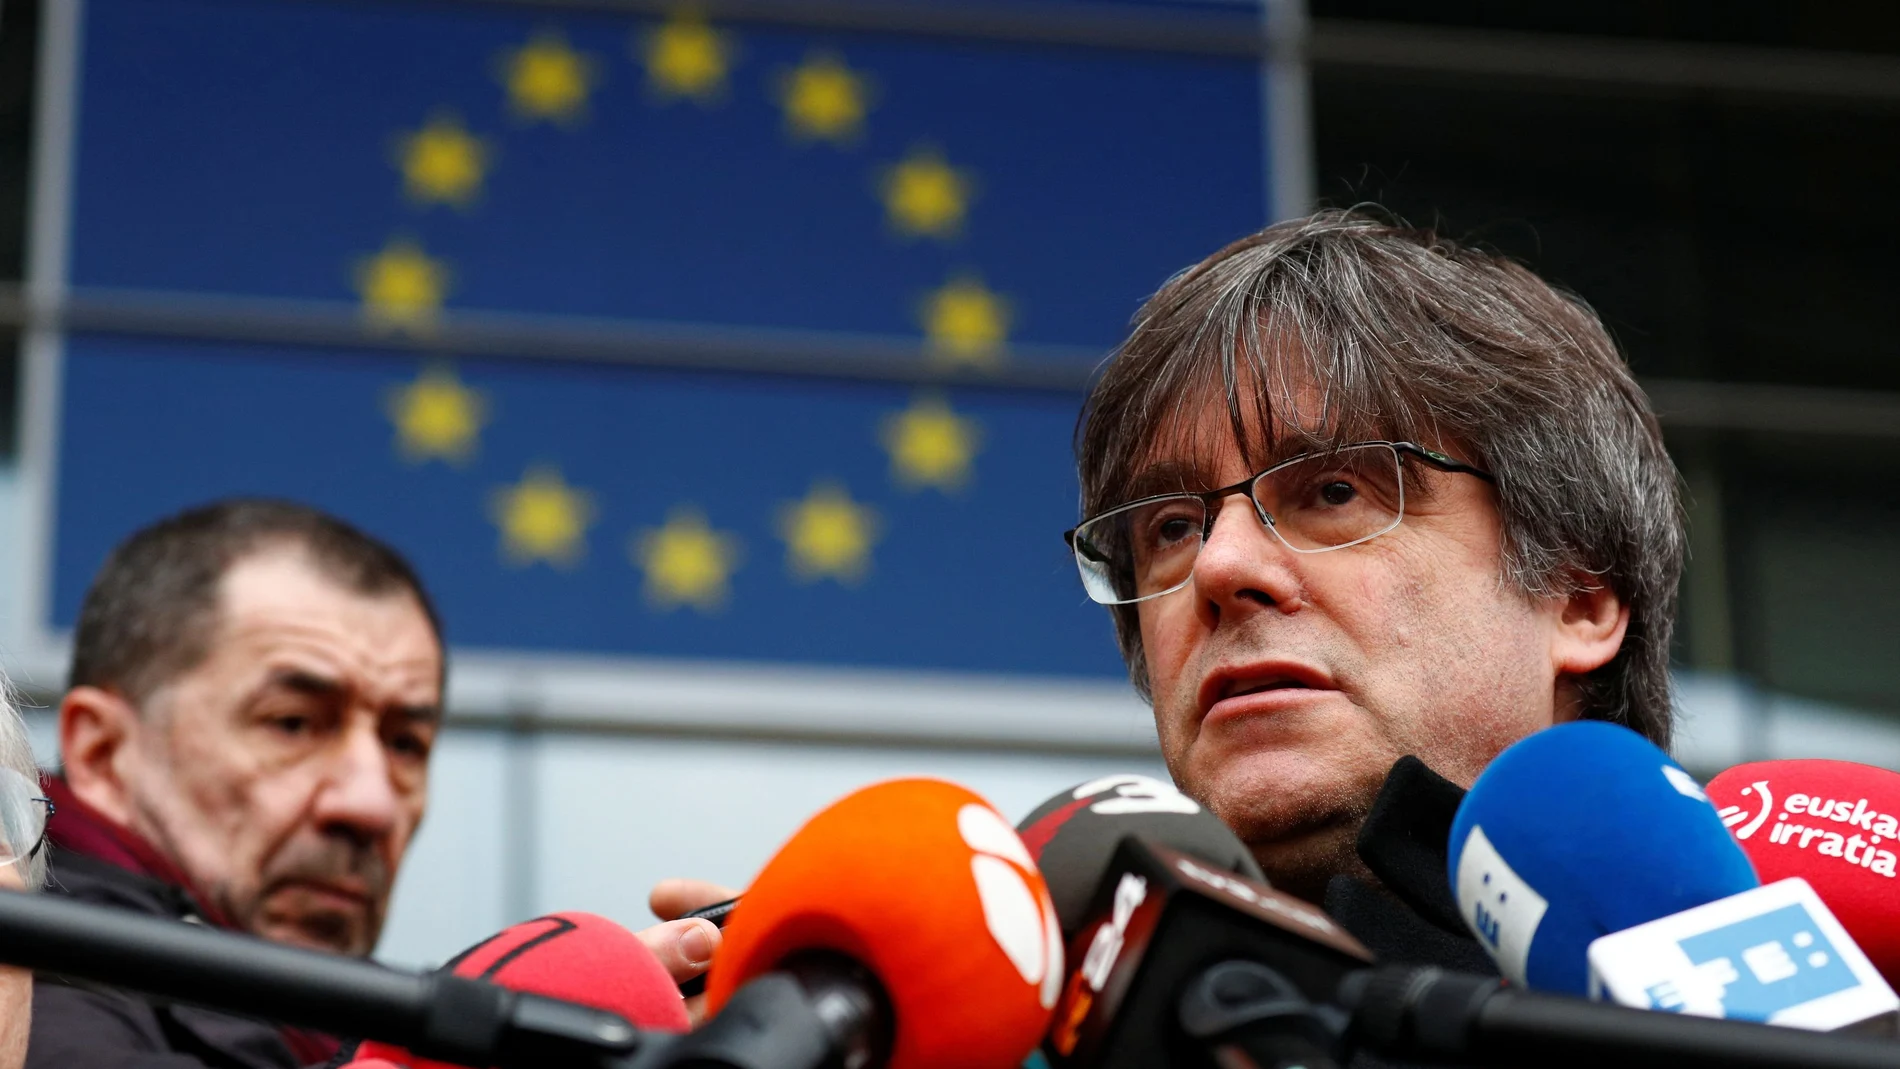 Former member of the Catalan government Puigdemont speaks to the media outside the EU Parliament in Brussels